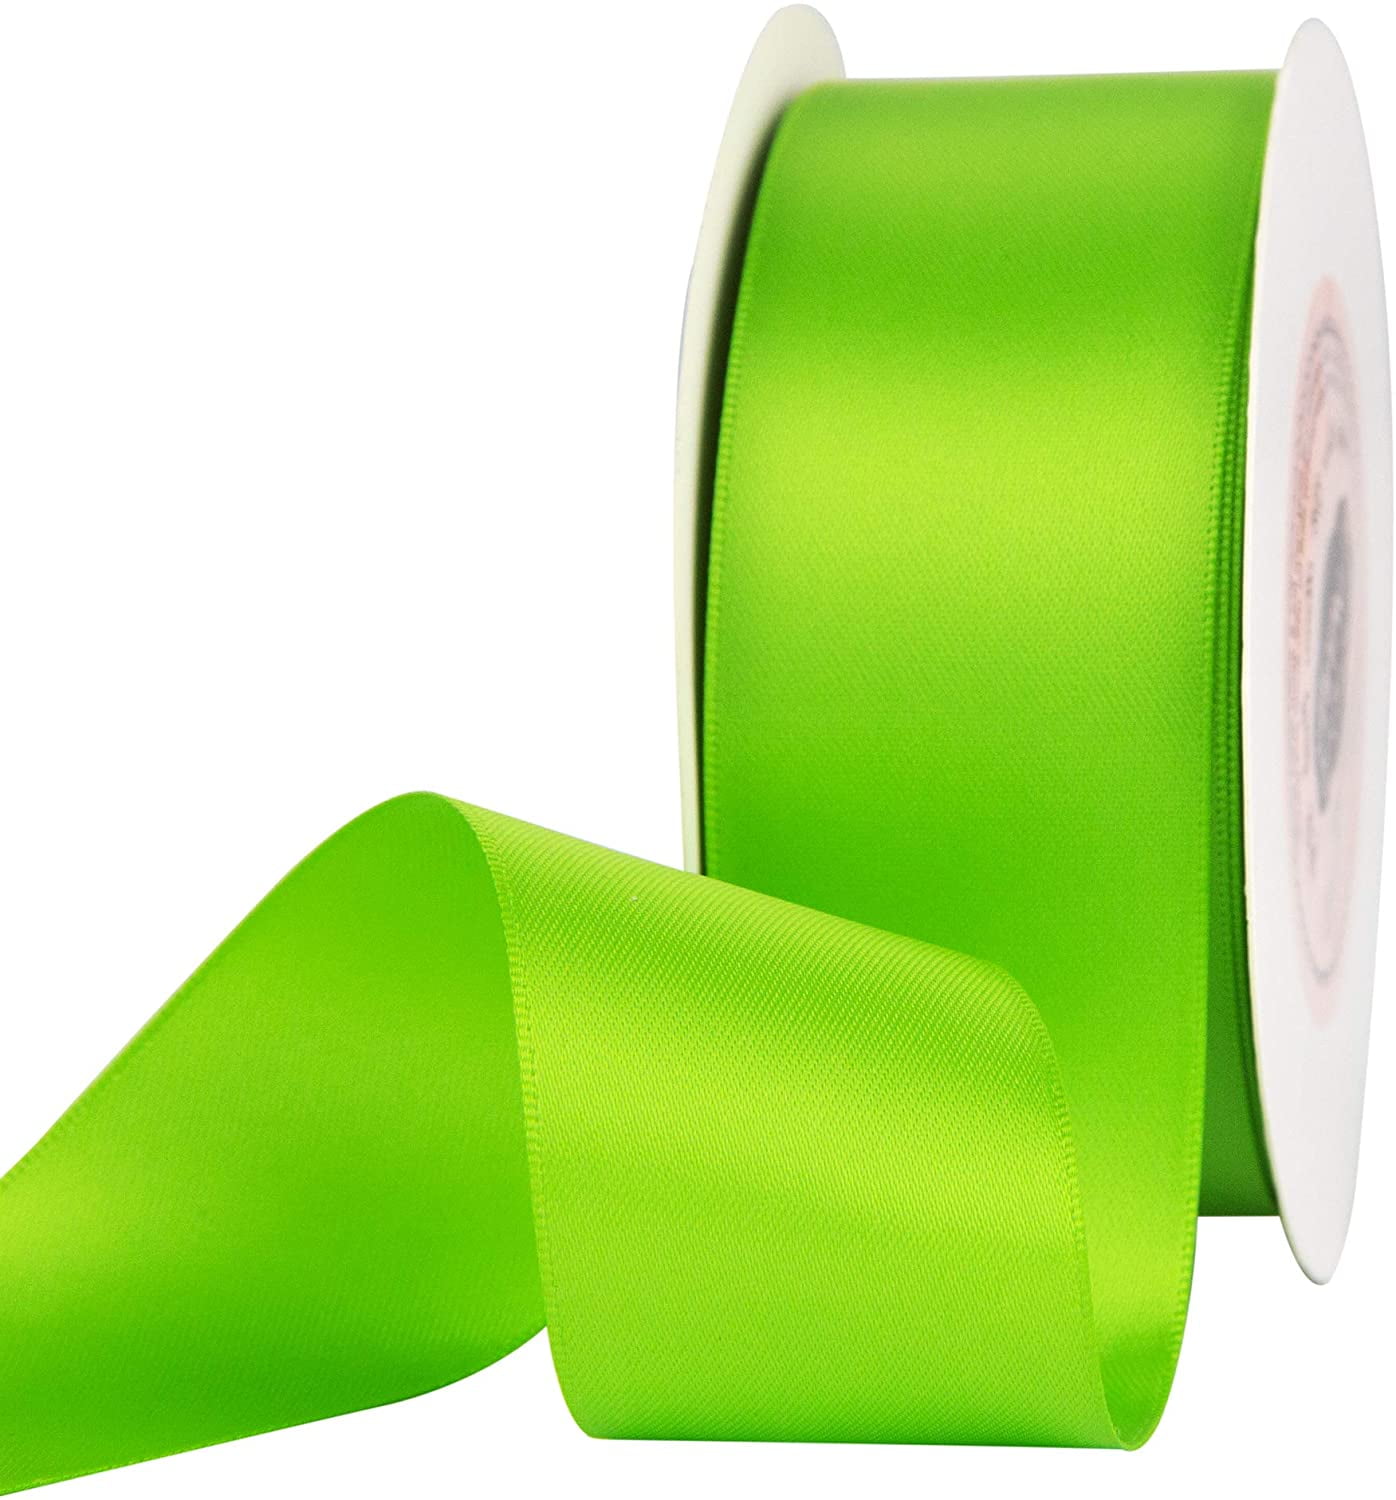 VATIN 1-1/2 Wide Double Faced Polyester Apple Green Satin Ribbon Continuous Ribbon- 25 Yard Perfect for Wedding Bow Making & Other Projects Gift Wrapping